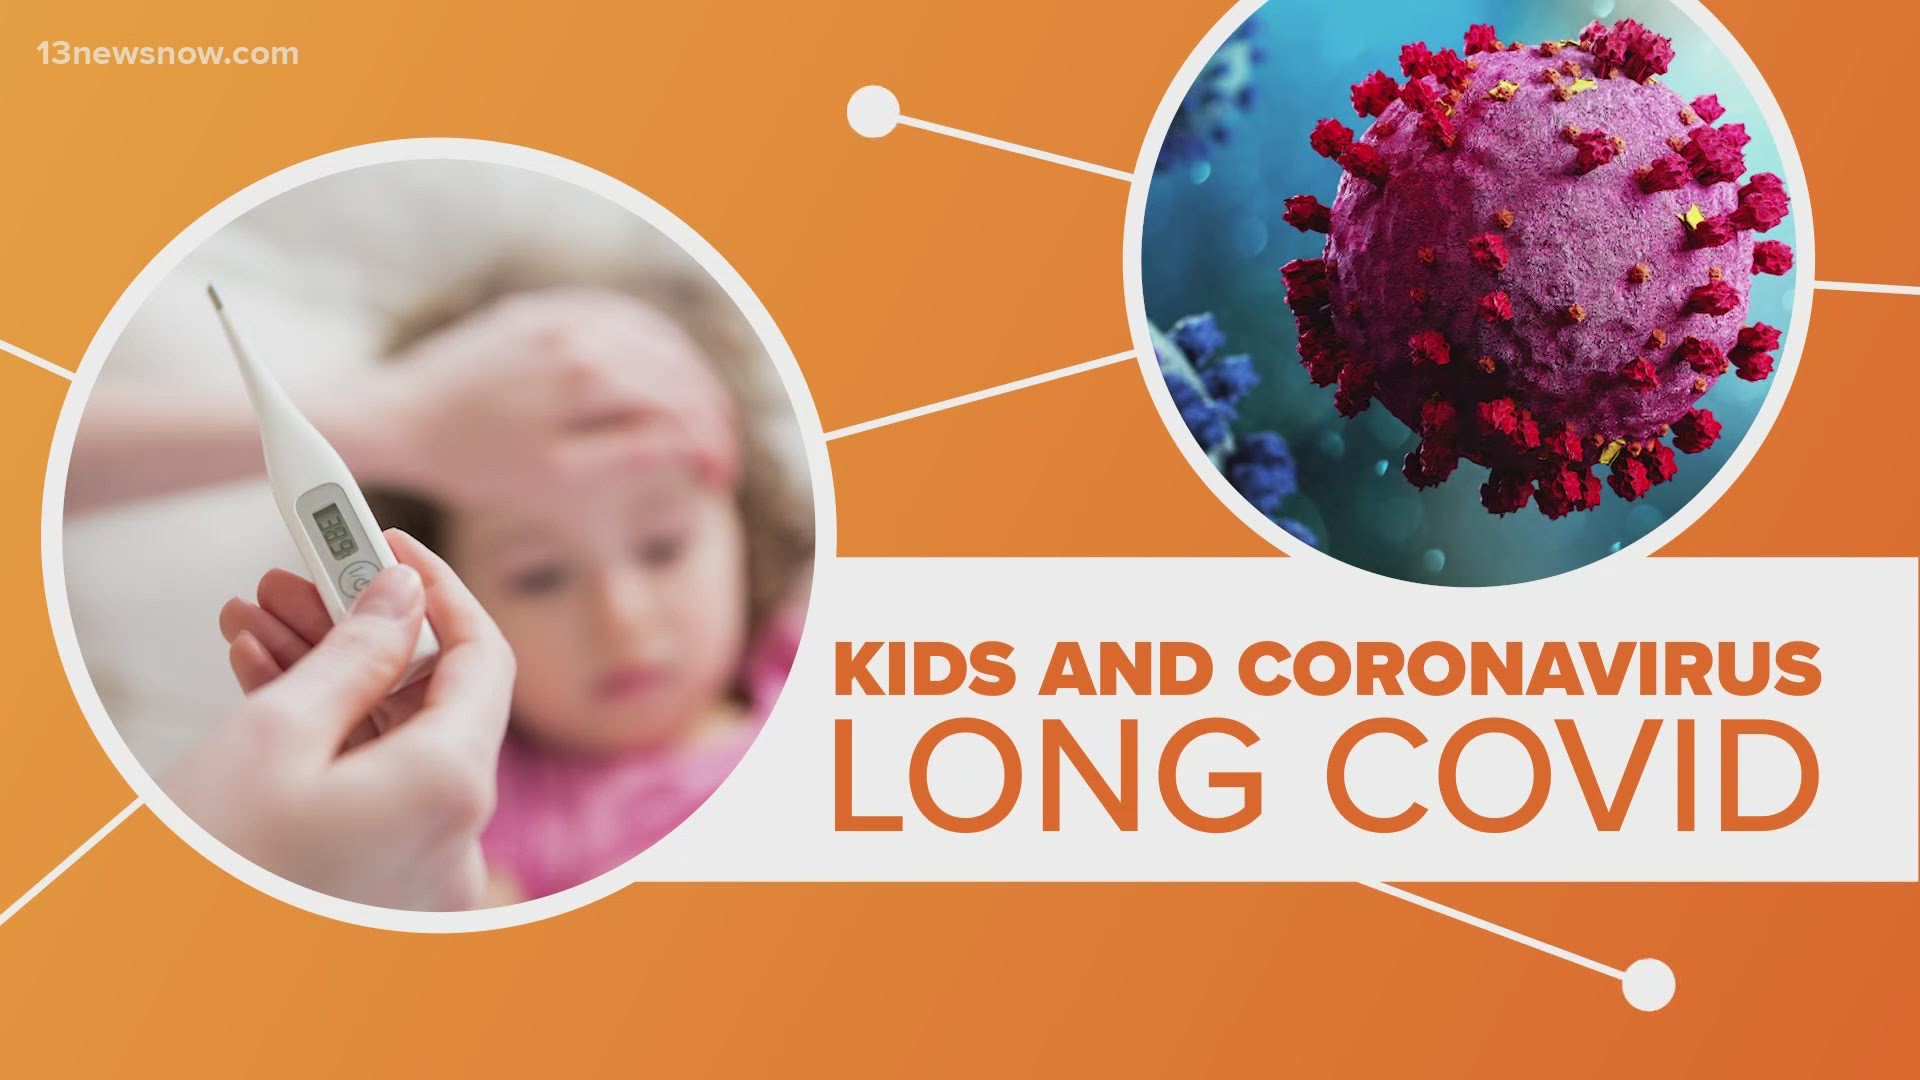 Connect the Dots: Long COVID and kids